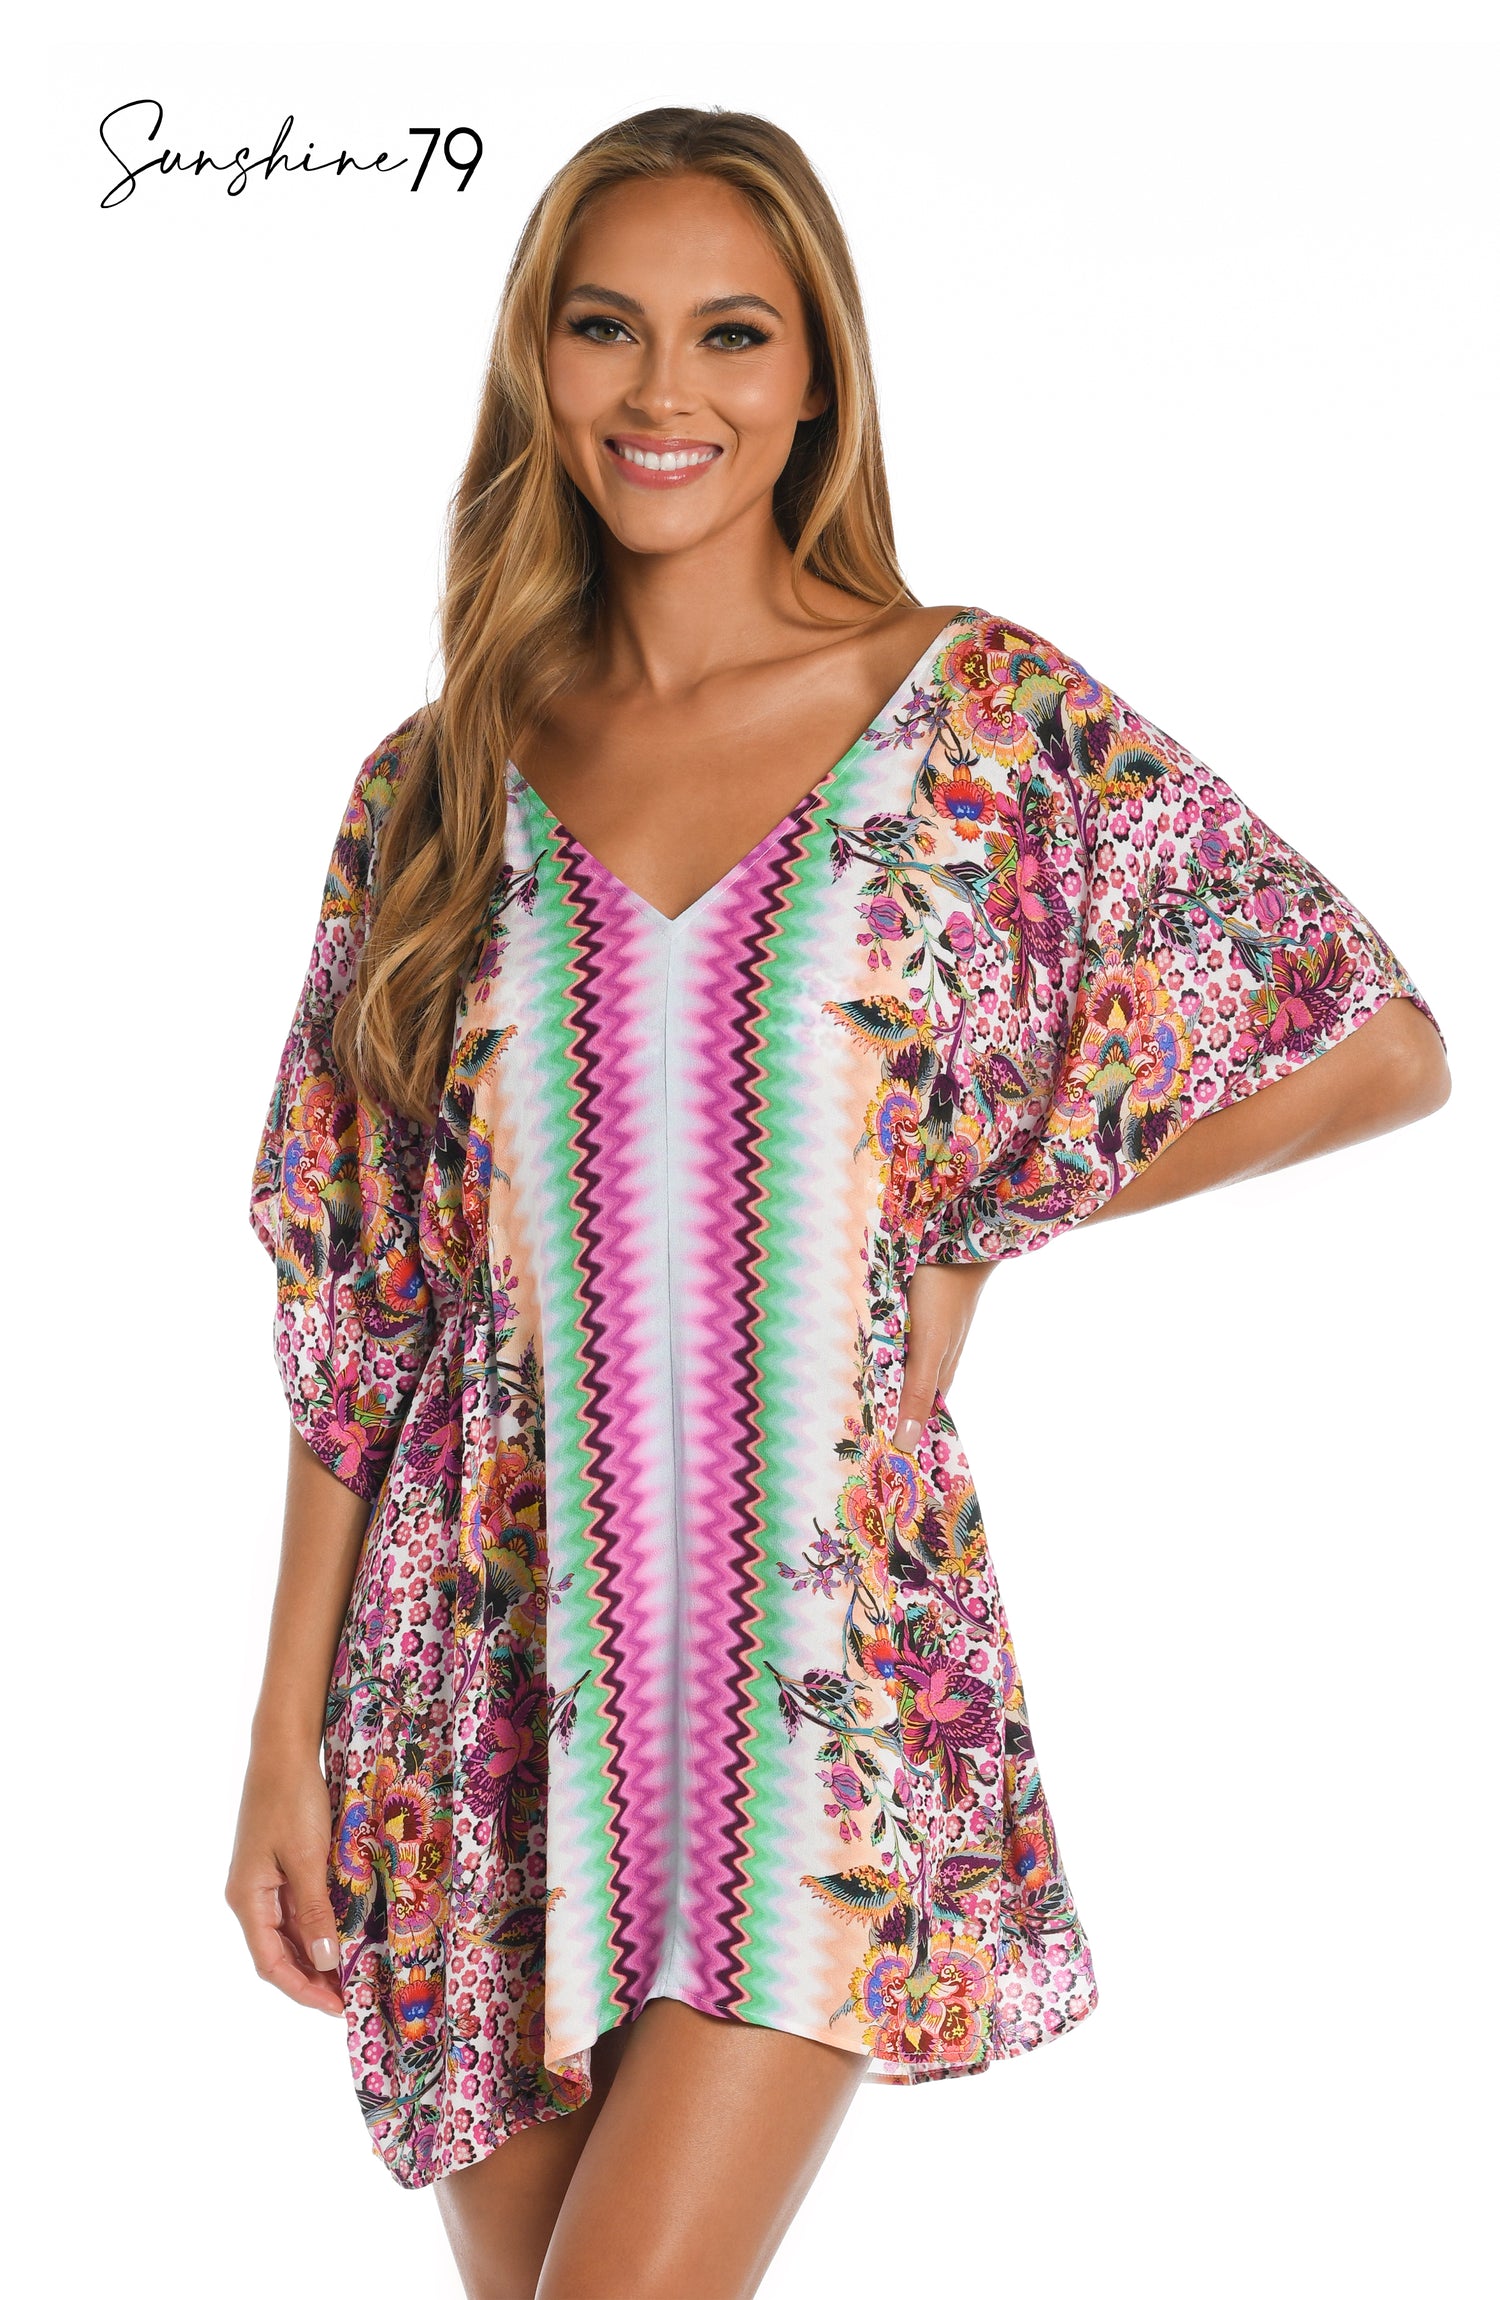 Model is wearing a pink multicolored floral and striped printed v neck caftan cover up from our Sunshine 79 brand.